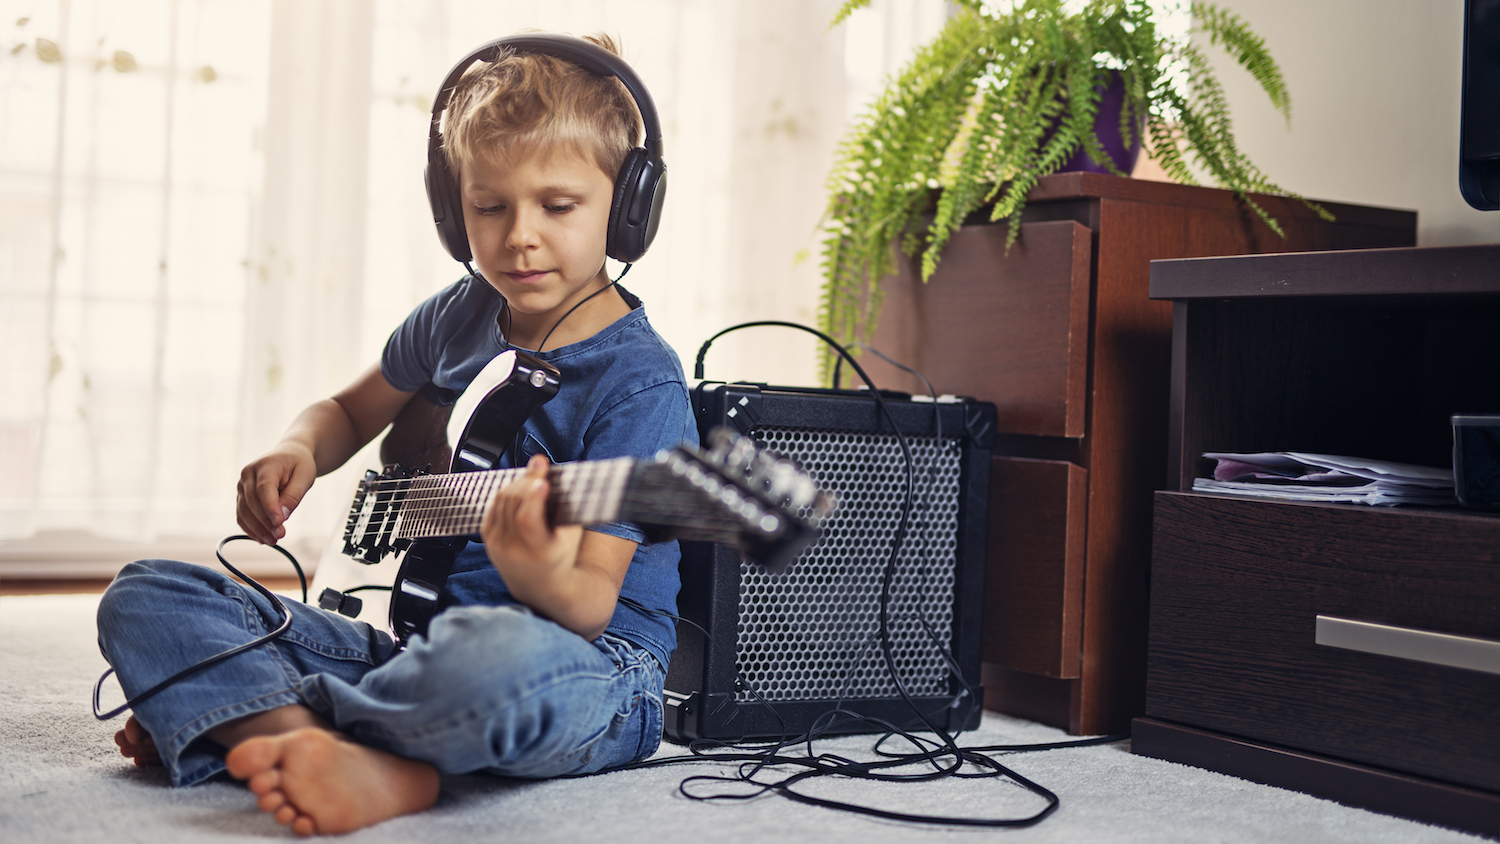 8 great guitars for kids: acoustic and electric guitar options for children  | Guitar World